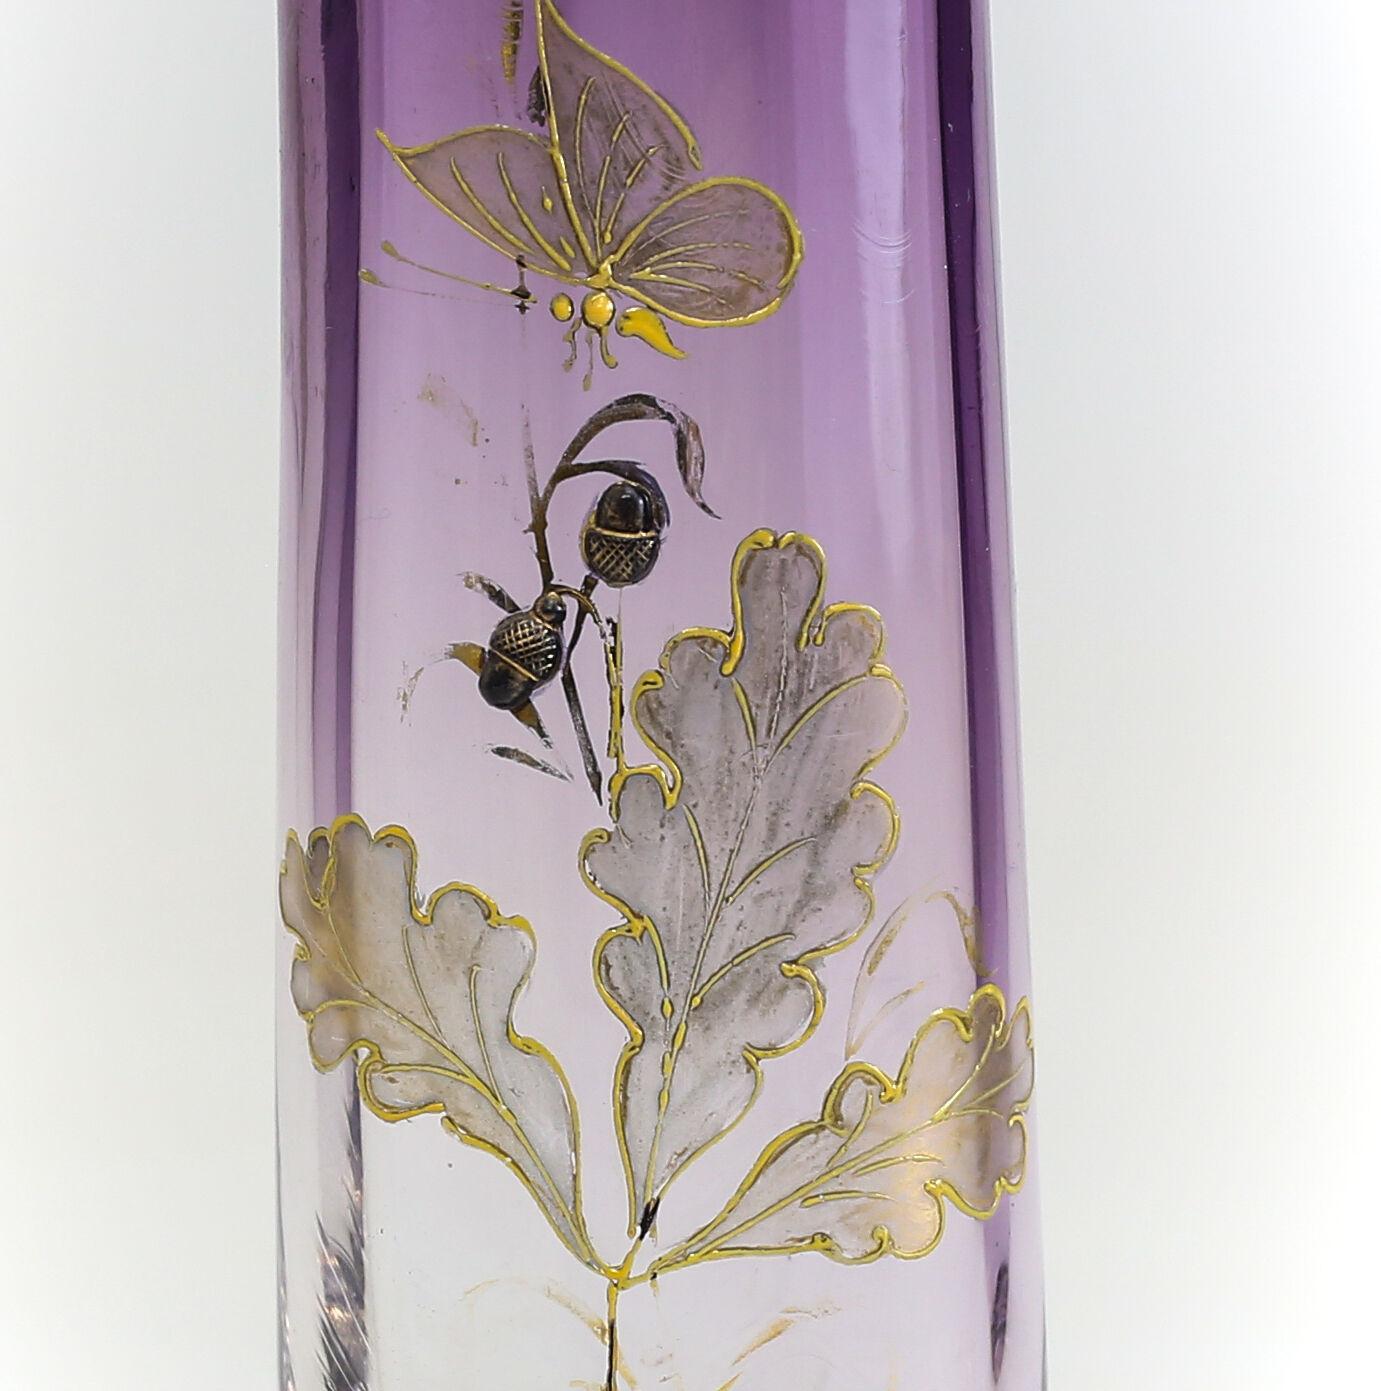 Moser Art Glass Raised Gold Gilt Vase Amethyst Clear Raised Leaves Butterflies

Two highly raised 'bugs' or flower buds. Etched 